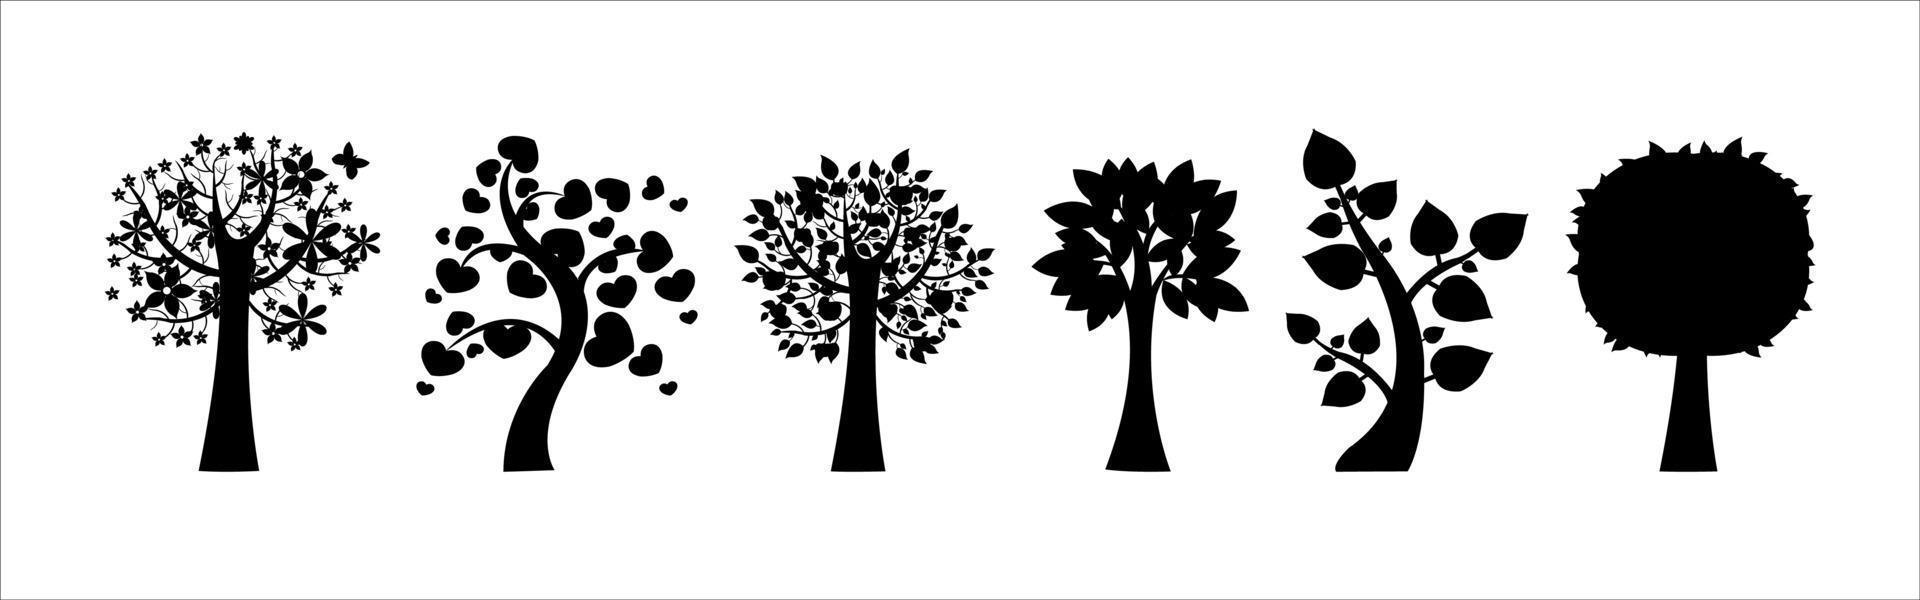 tree silhouette collection vector